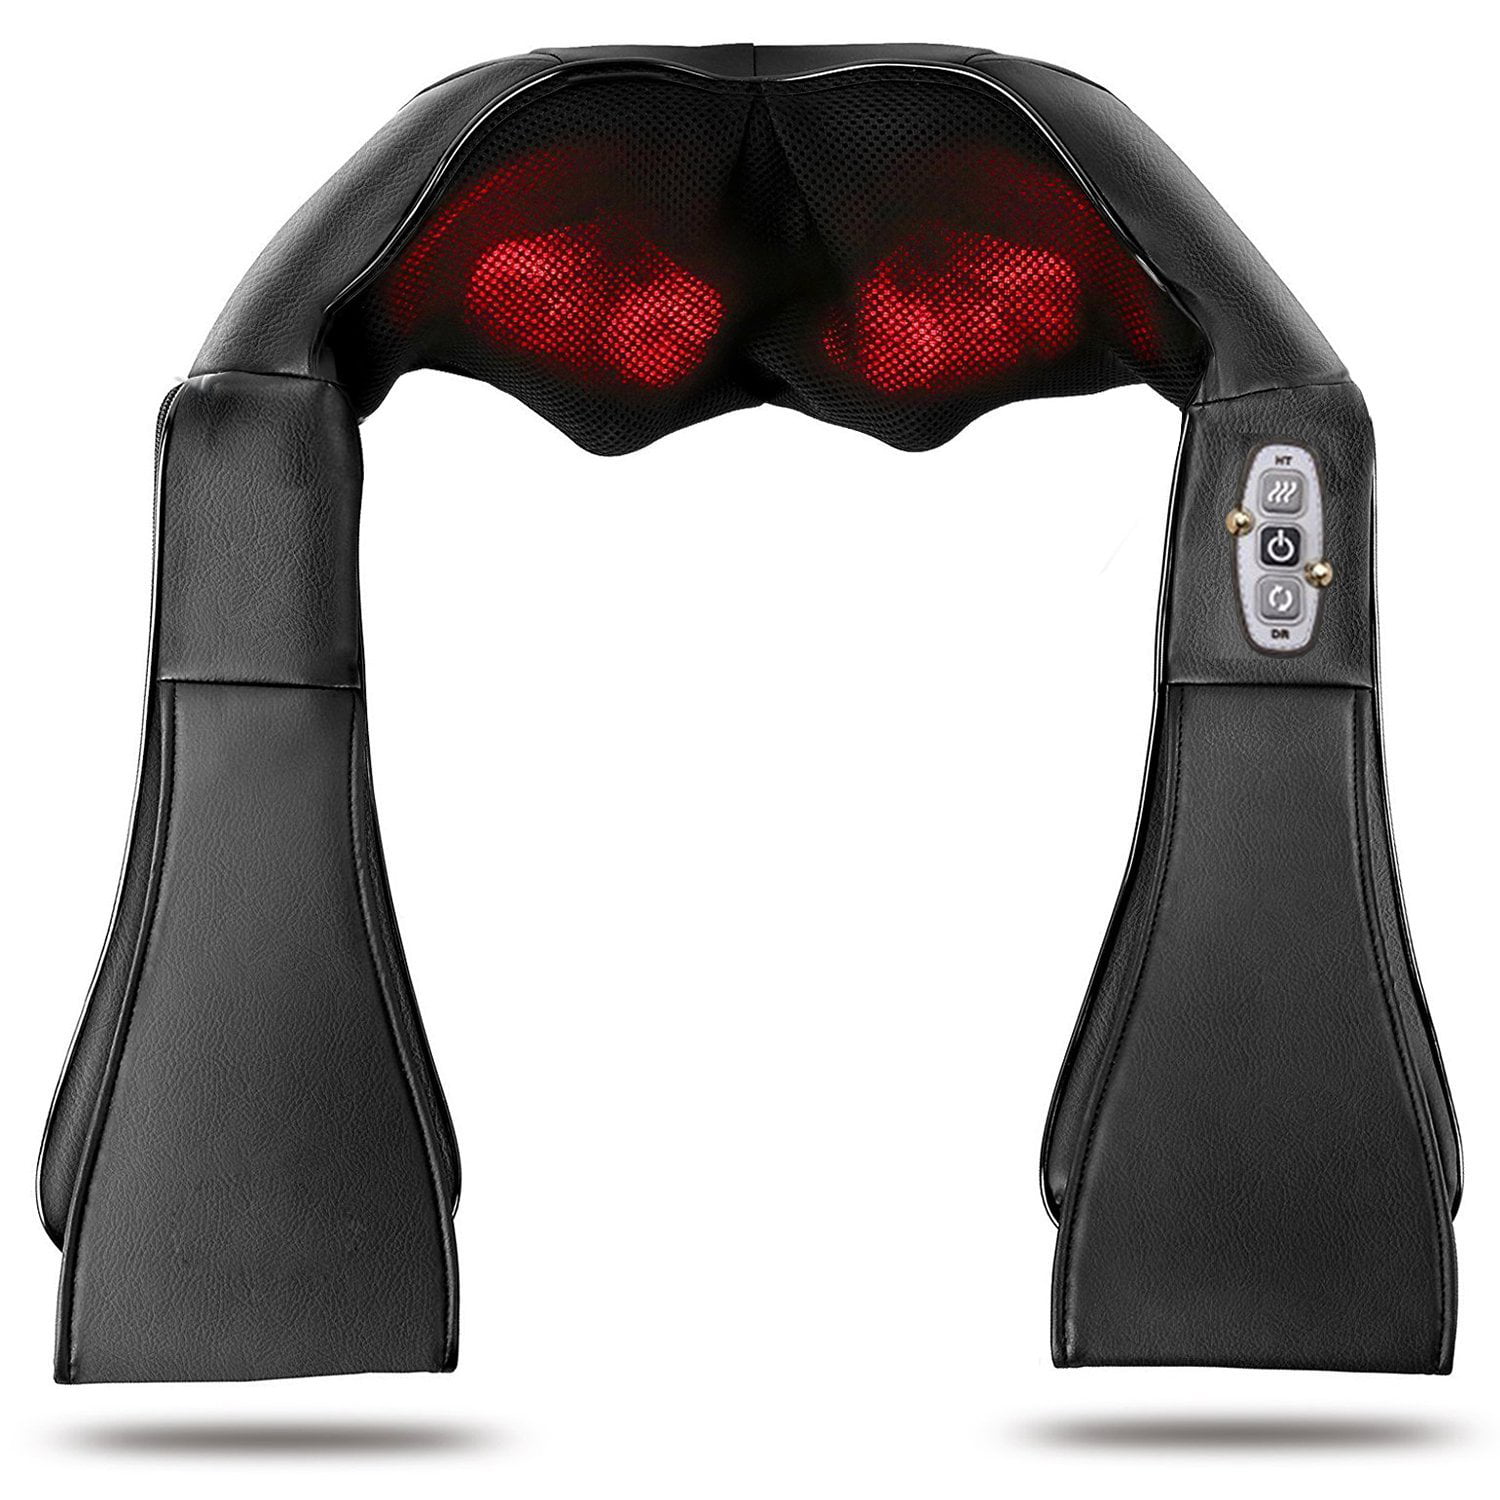 Belmint Shiatsu Back And Neck Massager With Heat And Deep Kneading